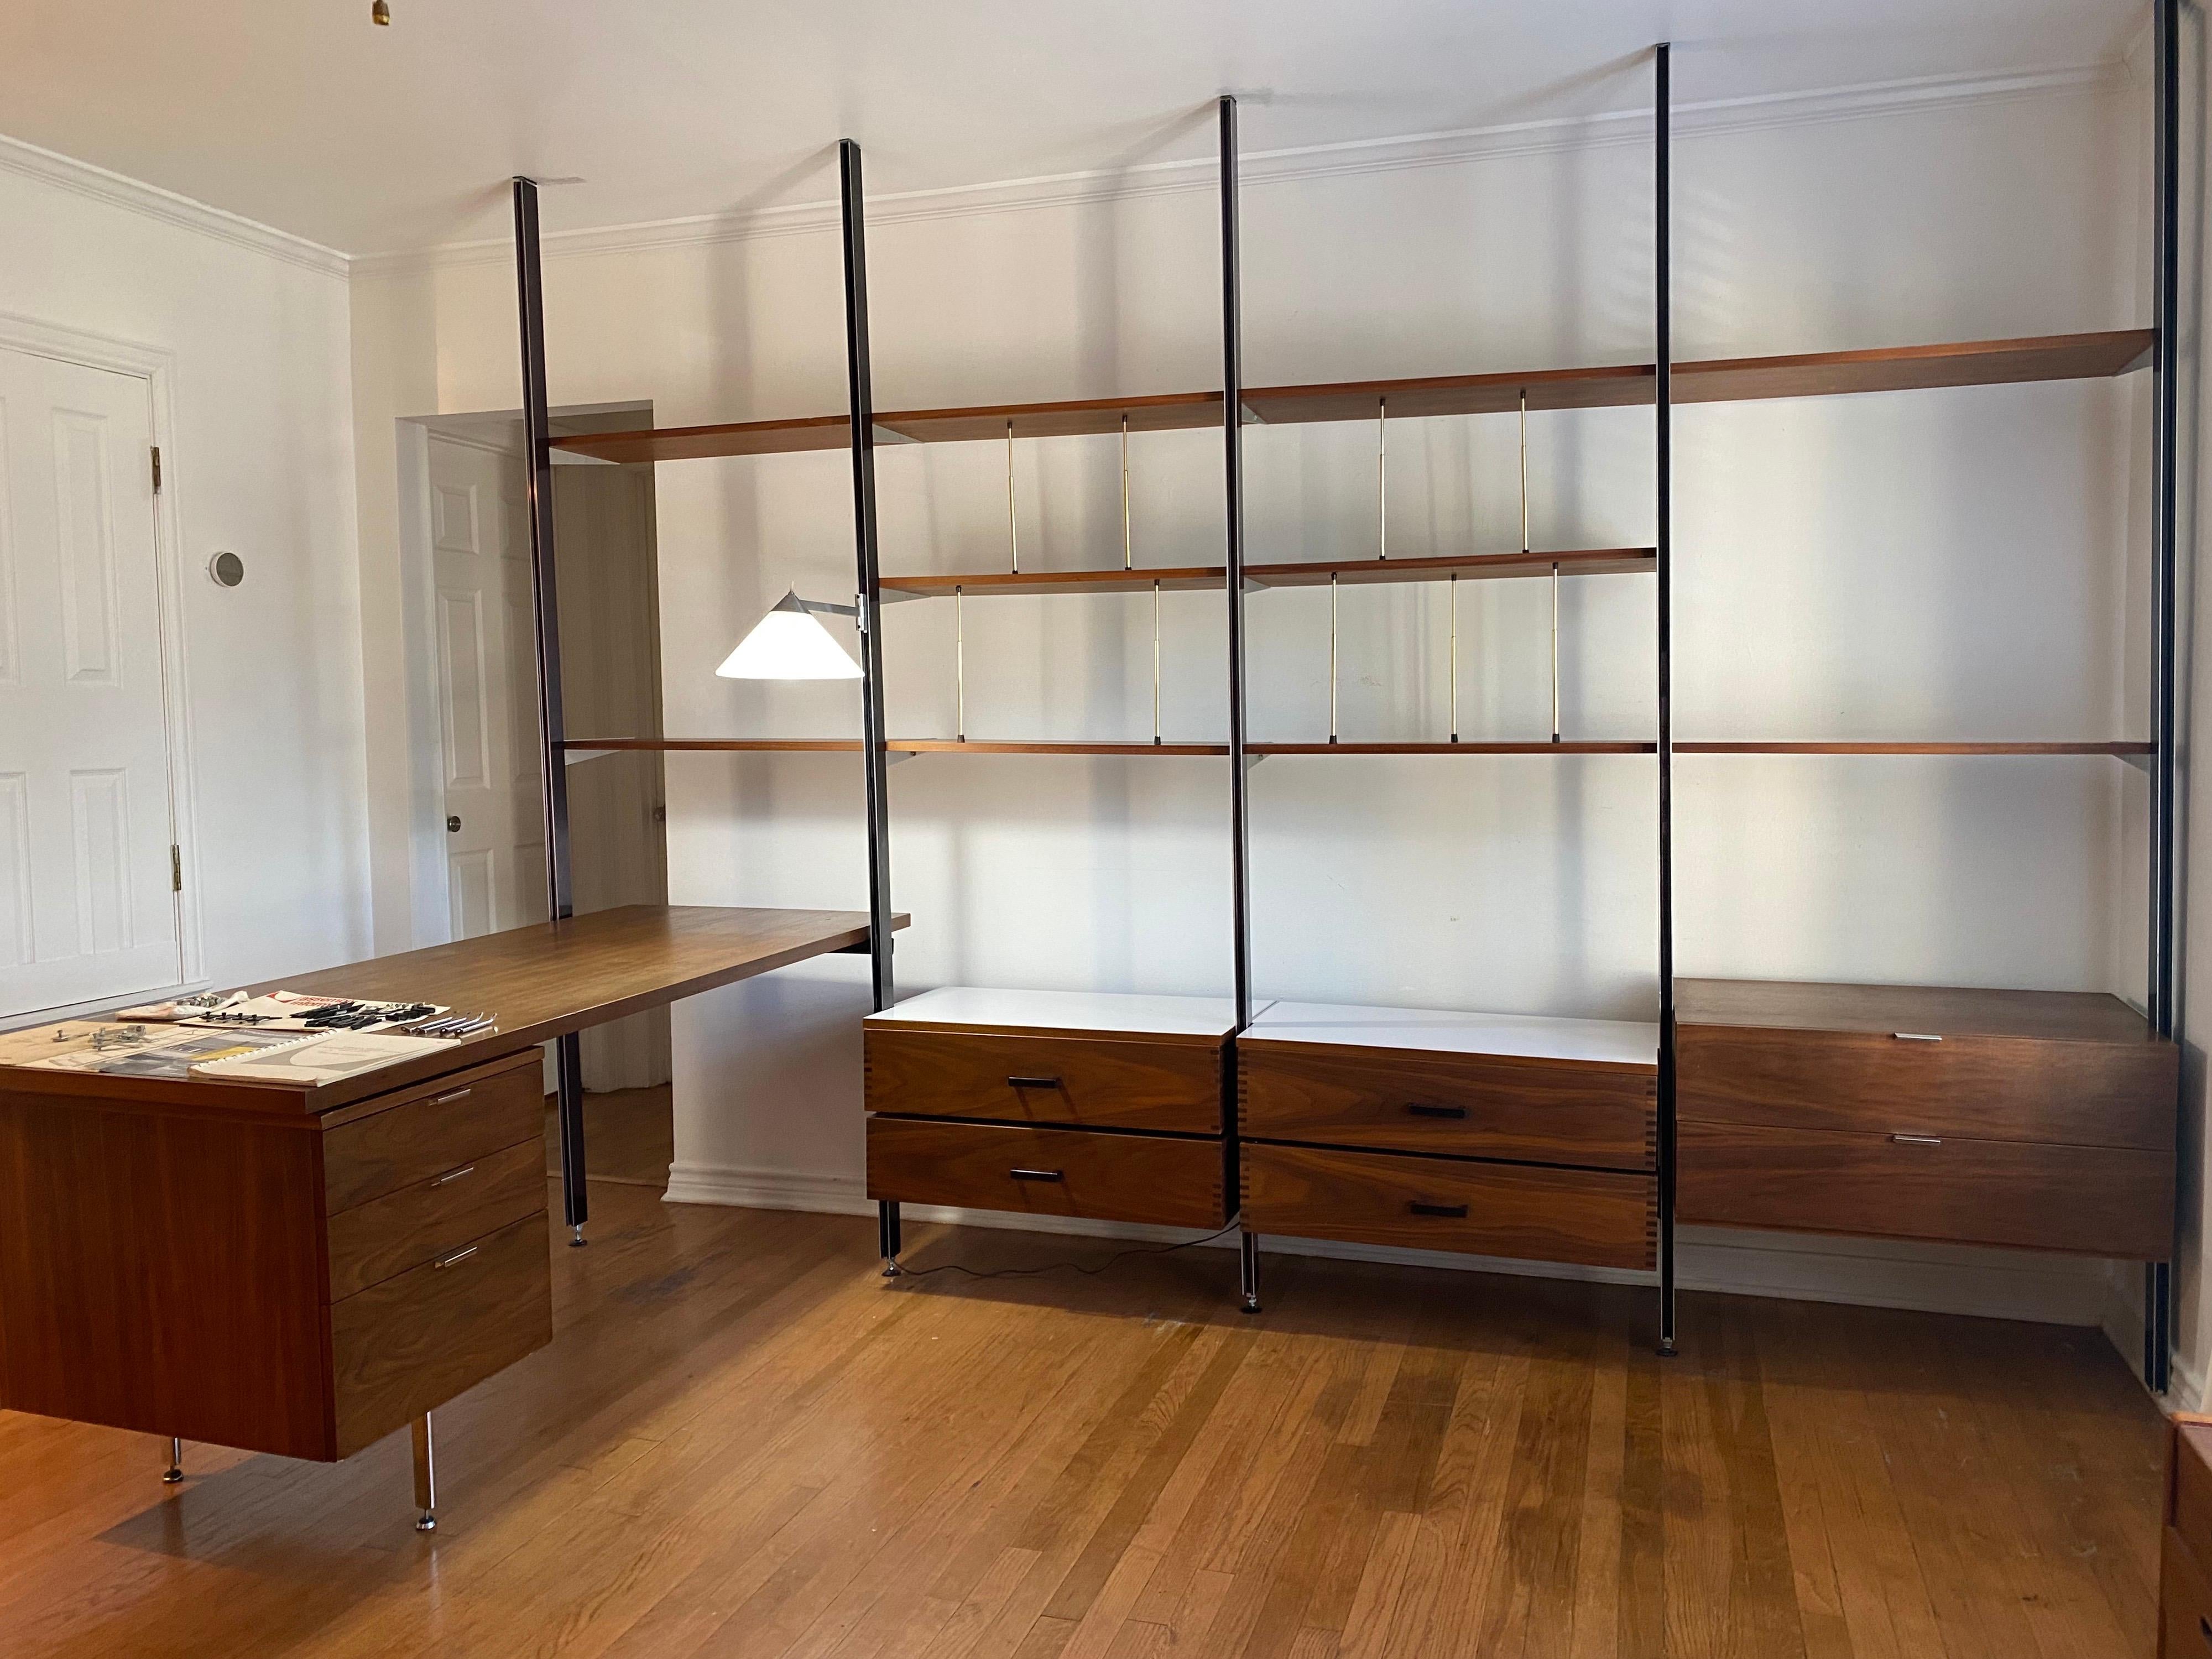 Beautiful Mid-Century Modern wall unit designed by George Nelson for Herman Miller provides a comprehensive storage system CSS that provides a completely flexible workspace. This Mid-Century Modern wall unit is made of walnut and comes with